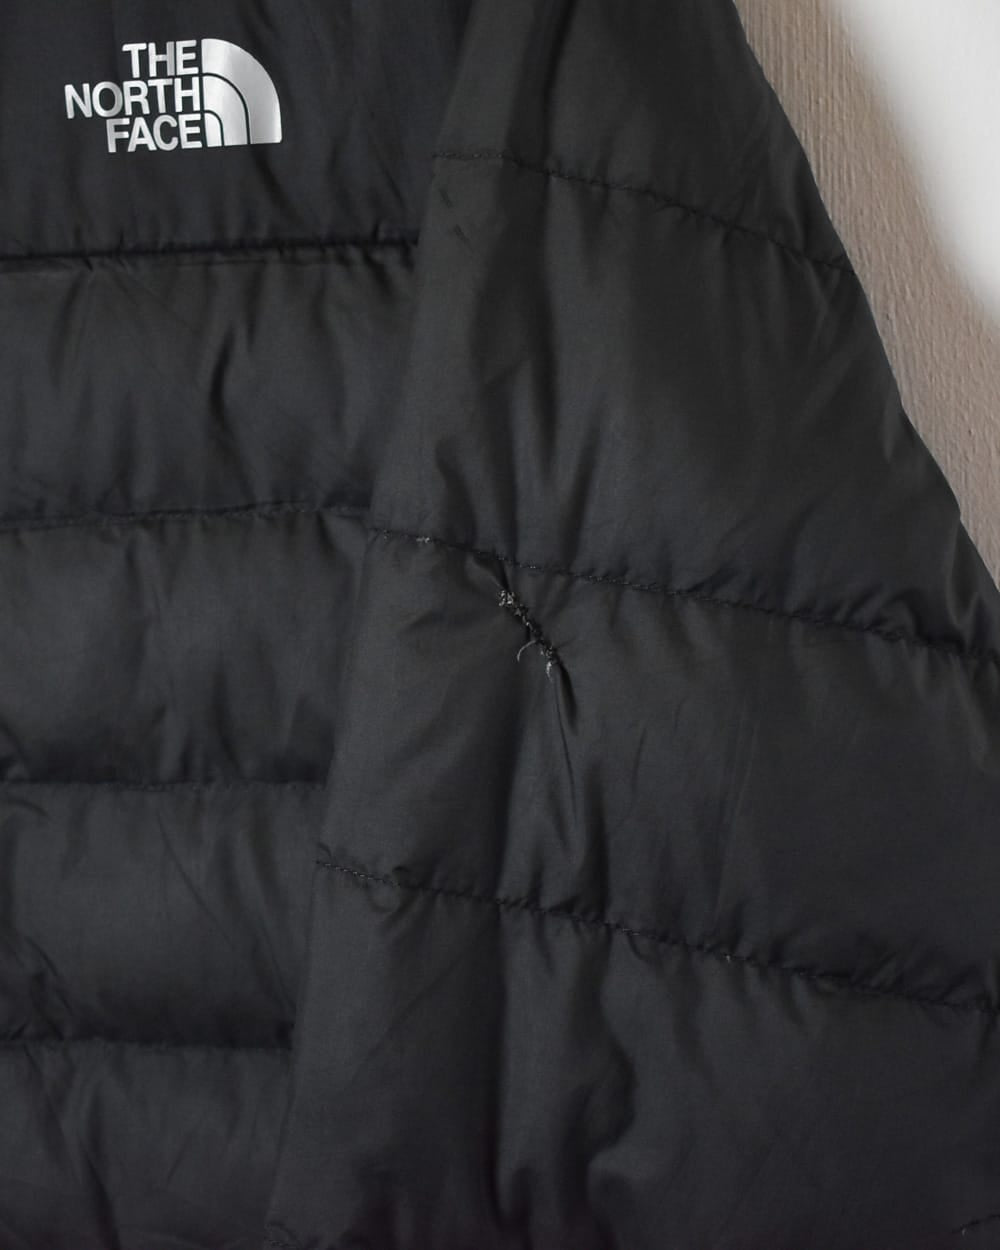 Black The North Face Puffer Jacket - Large